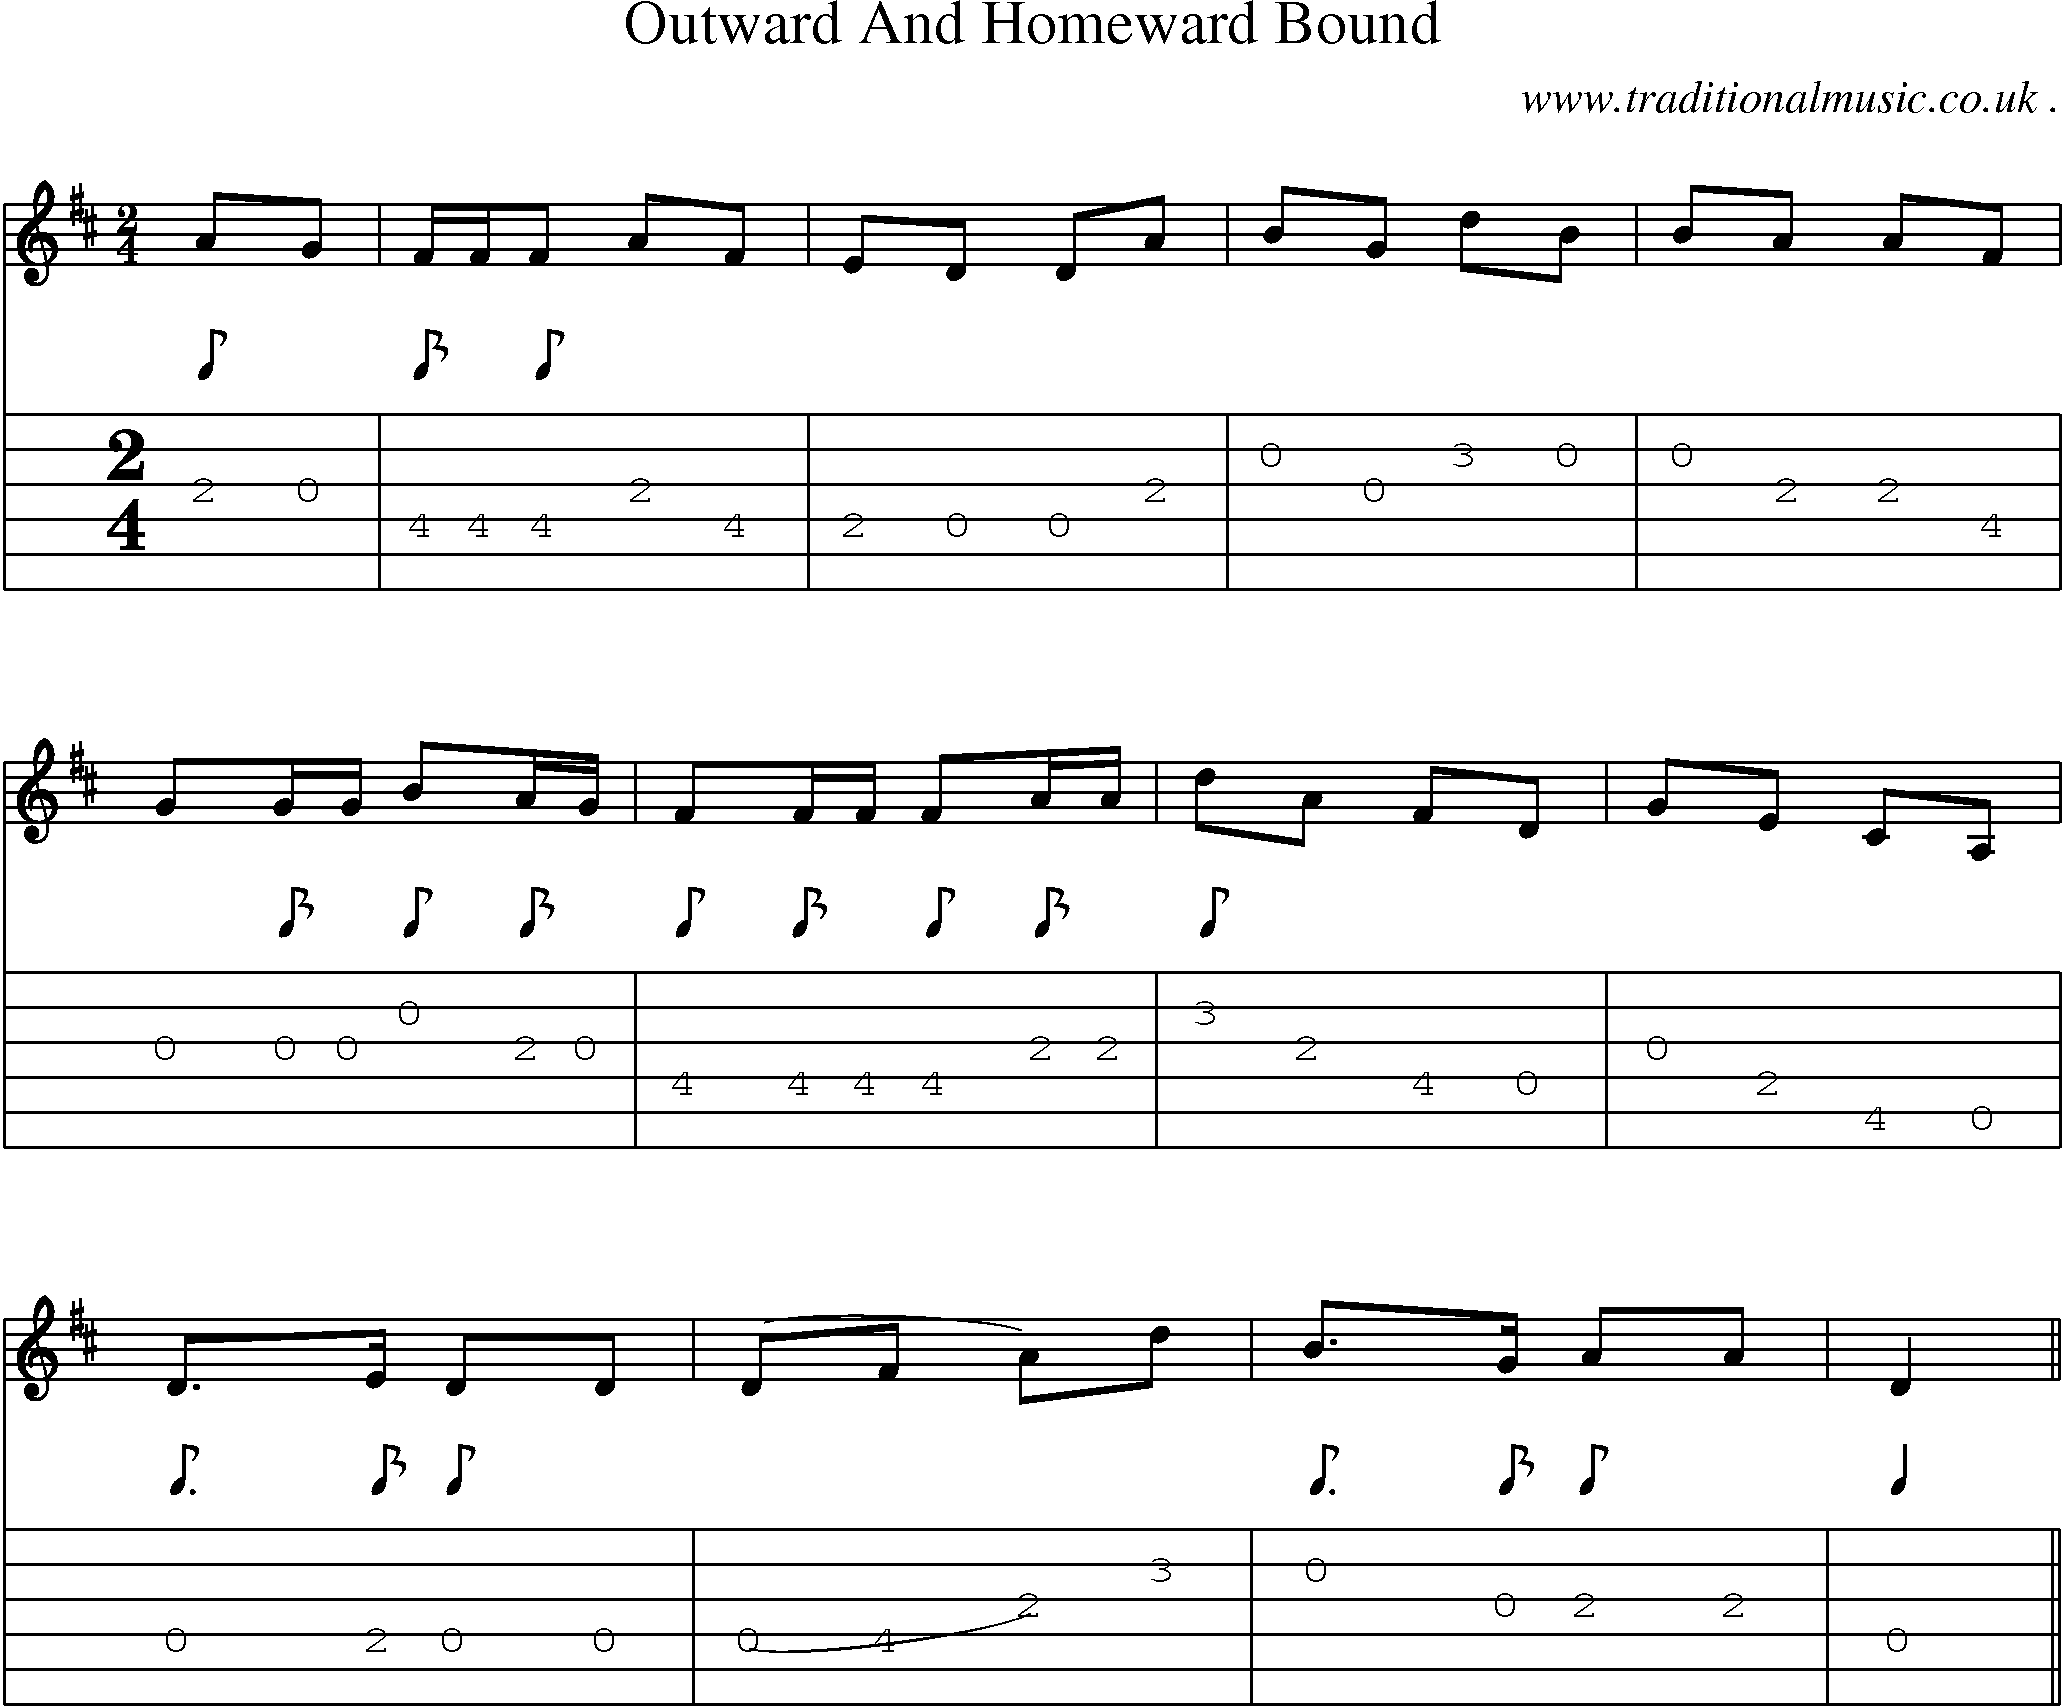 Sheet-Music and Guitar Tabs for Outward And Homeward Bound